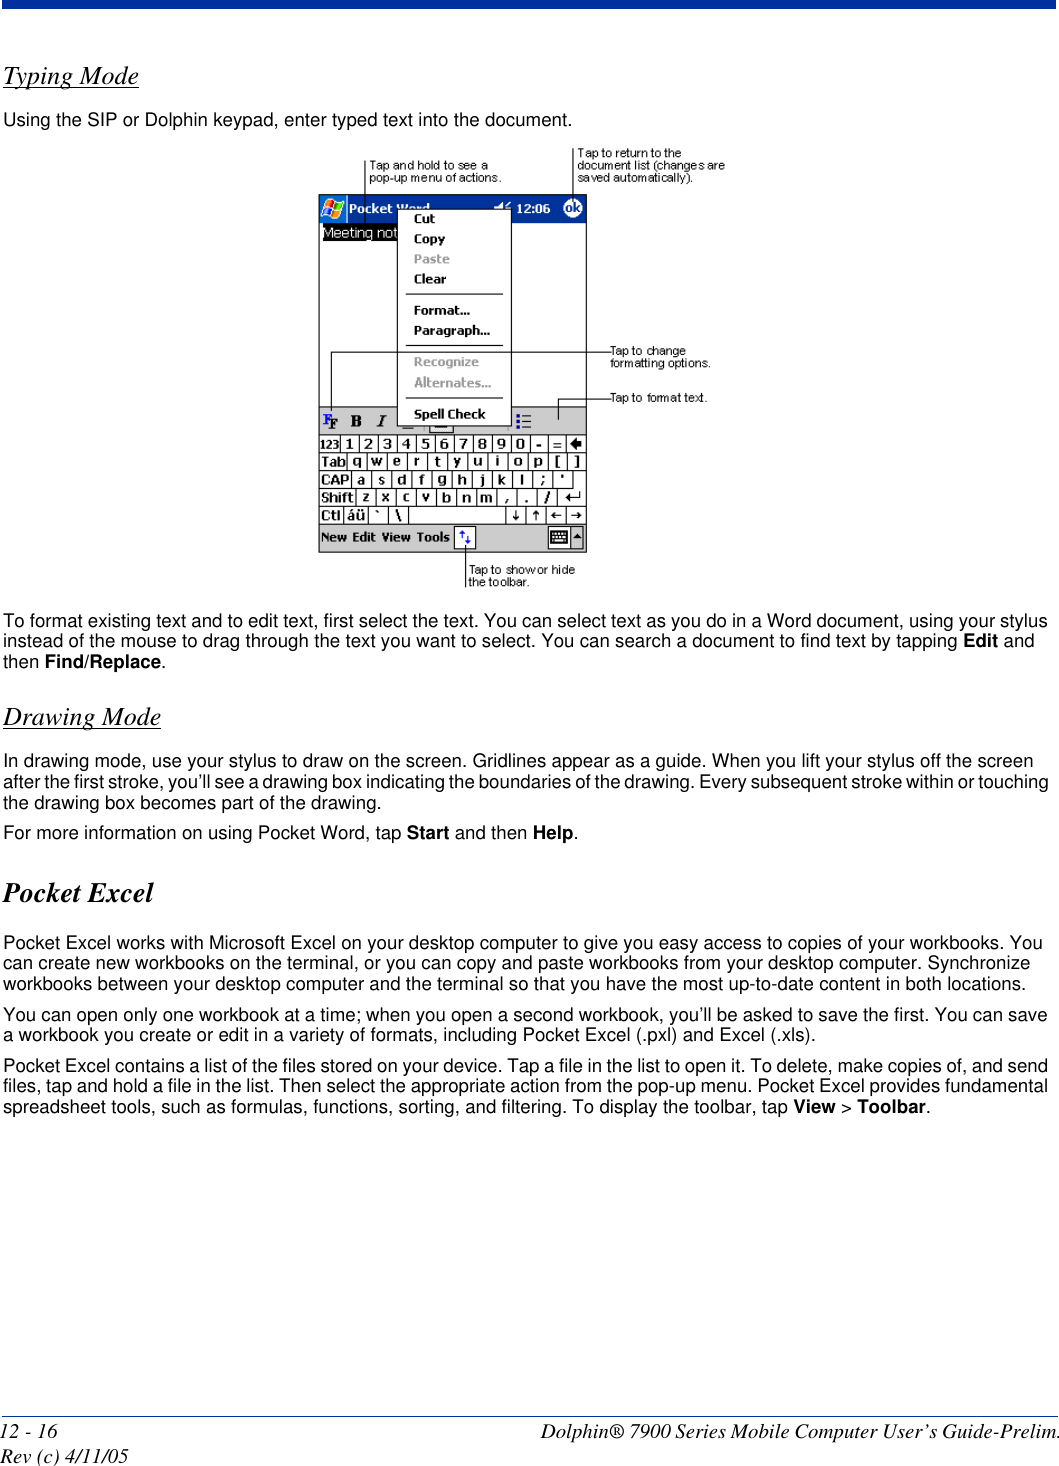 12 - 16 Dolphin® 7900 Series Mobile Computer User’s Guide-Prelim. Rev (c) 4/11/05Typing ModeUsing the SIP or Dolphin keypad, enter typed text into the document. To format existing text and to edit text, first select the text. You can select text as you do in a Word document, using your stylus instead of the mouse to drag through the text you want to select. You can search a document to find text by tapping Edit and then Find/Replace.Drawing ModeIn drawing mode, use your stylus to draw on the screen. Gridlines appear as a guide. When you lift your stylus off the screen after the first stroke, you’ll see a drawing box indicating the boundaries of the drawing. Every subsequent stroke within or touching the drawing box becomes part of the drawing. For more information on using Pocket Word, tap Start and then Help.Pocket ExcelPocket Excel works with Microsoft Excel on your desktop computer to give you easy access to copies of your workbooks. You can create new workbooks on the terminal, or you can copy and paste workbooks from your desktop computer. Synchronize workbooks between your desktop computer and the terminal so that you have the most up-to-date content in both locations.You can open only one workbook at a time; when you open a second workbook, you’ll be asked to save the first. You can save a workbook you create or edit in a variety of formats, including Pocket Excel (.pxl) and Excel (.xls).Pocket Excel contains a list of the files stored on your device. Tap a file in the list to open it. To delete, make copies of, and send files, tap and hold a file in the list. Then select the appropriate action from the pop-up menu. Pocket Excel provides fundamental spreadsheet tools, such as formulas, functions, sorting, and filtering. To display the toolbar, tap View &gt; Toolbar.